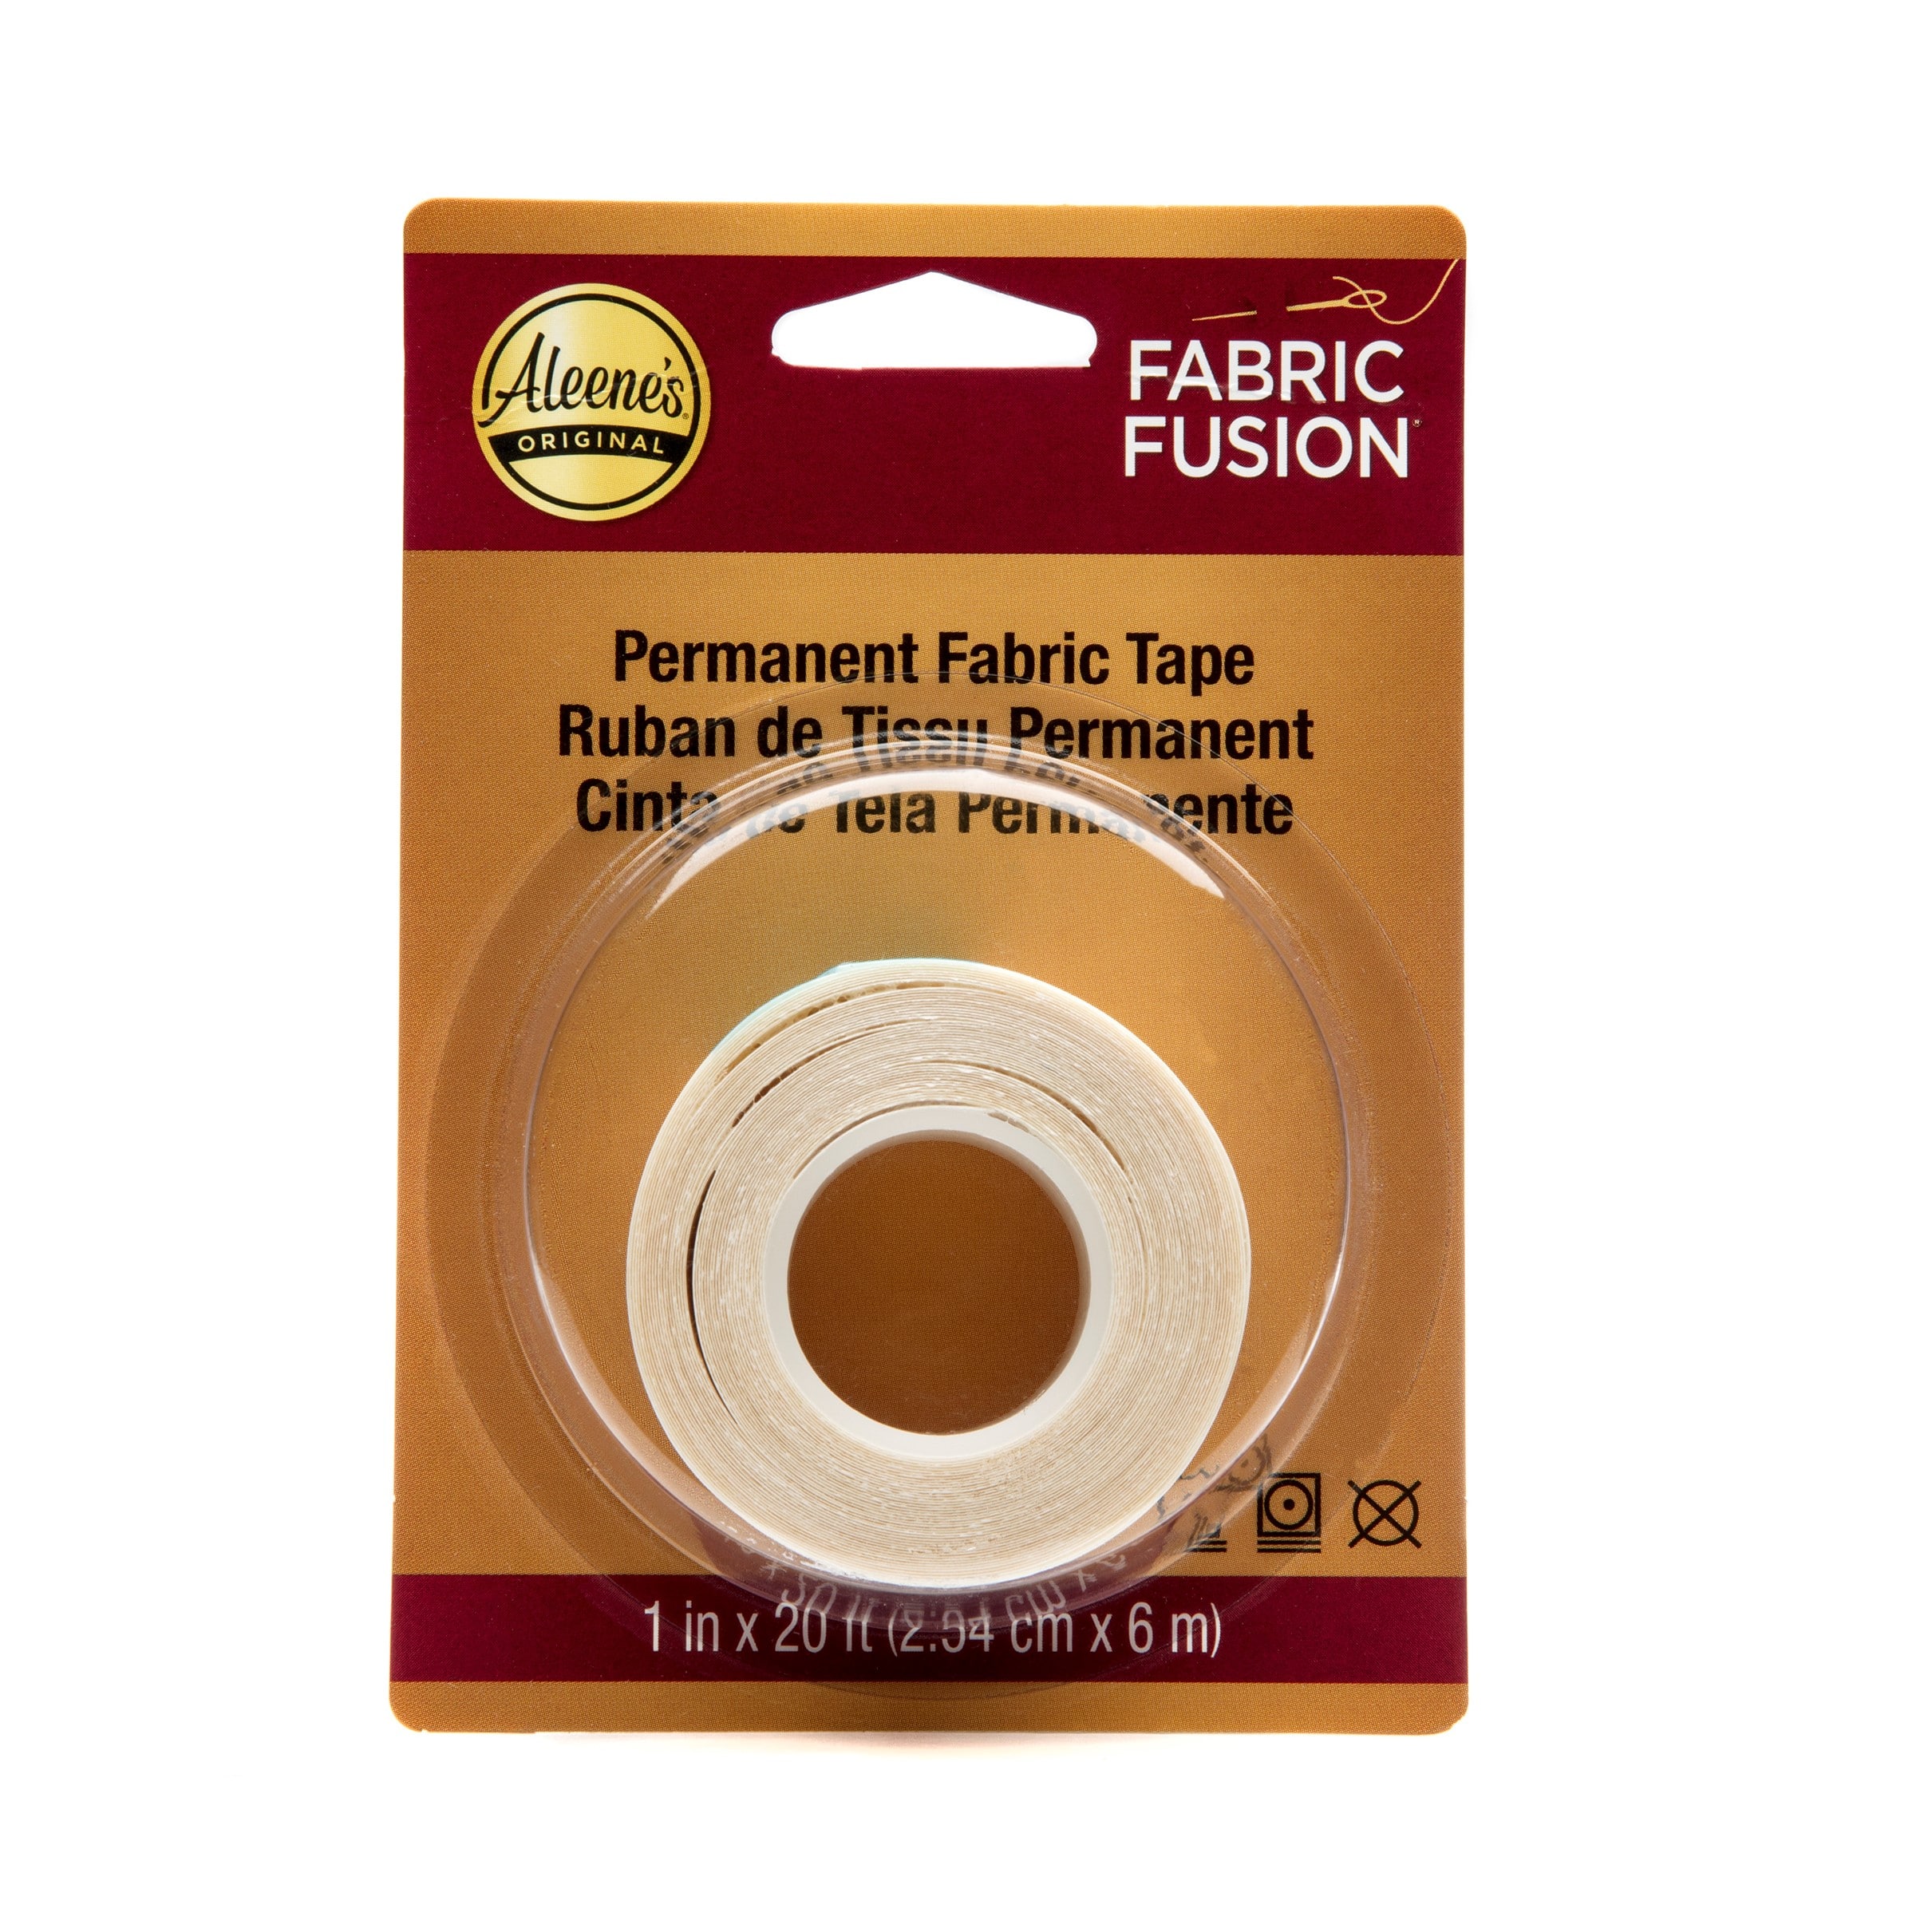 Aleene's Fabric Fusion Permanent Fabric Tape 29134 - The Home Depot